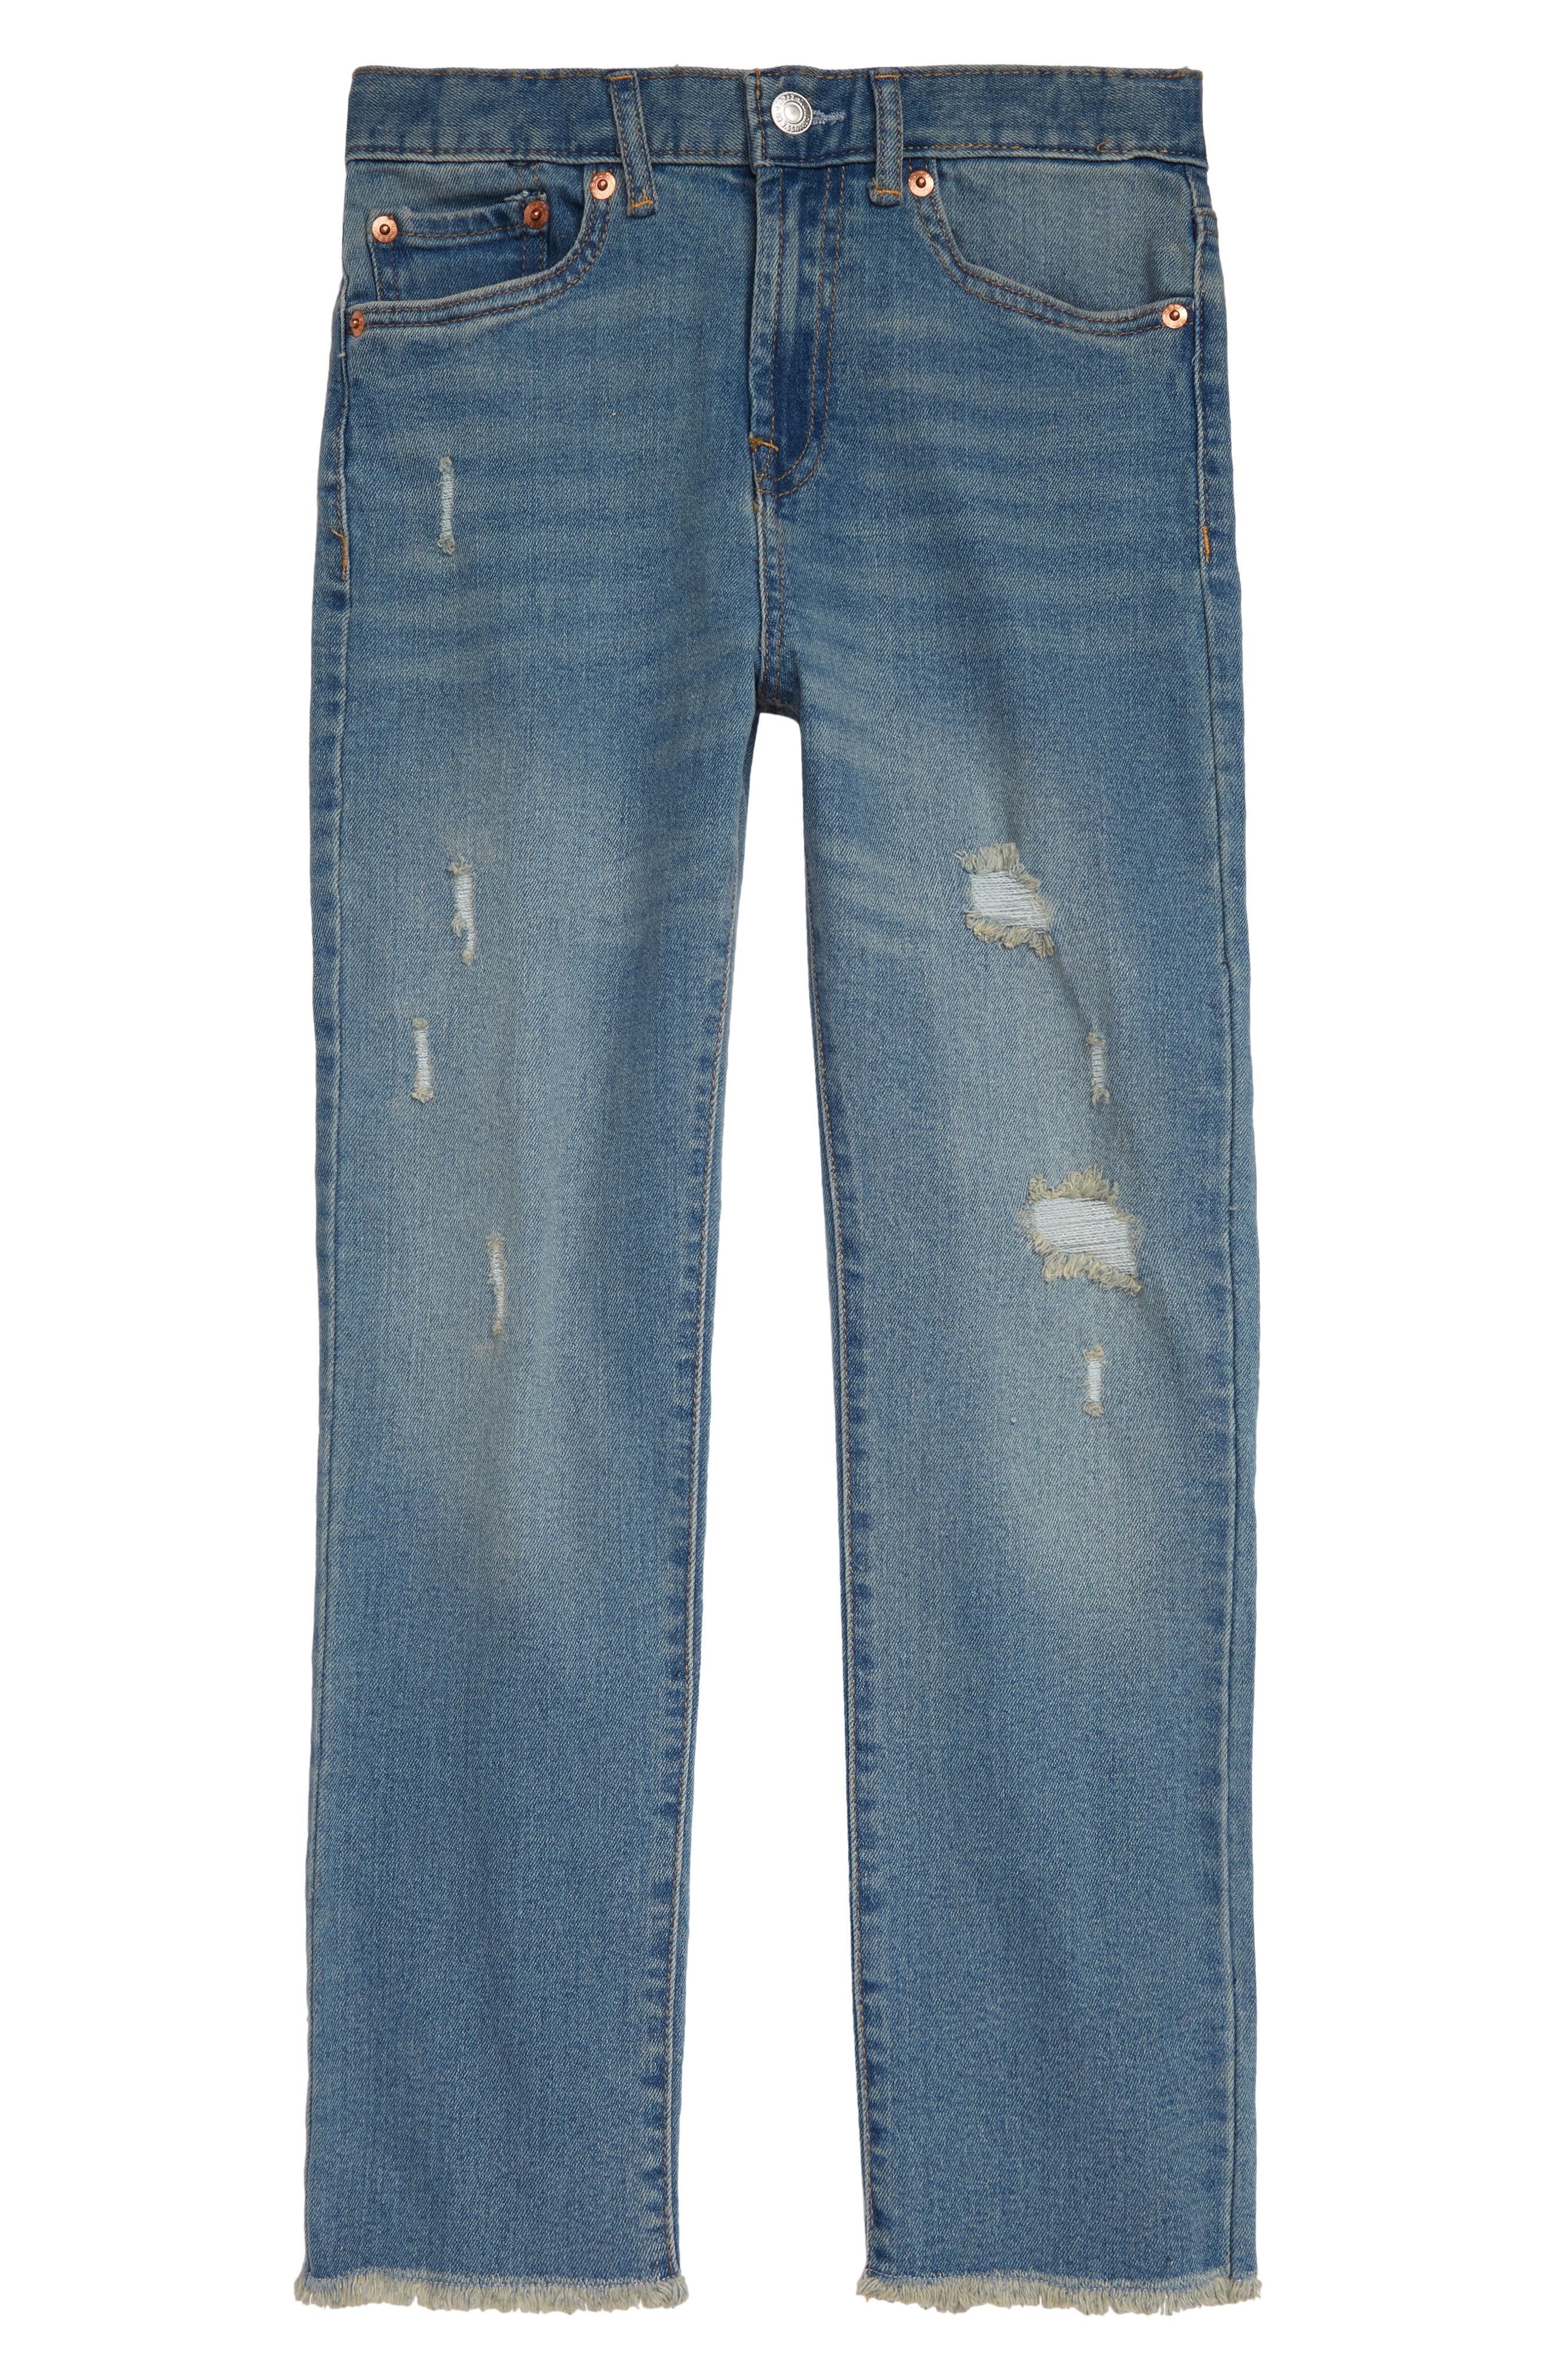 blue spice jeans canada